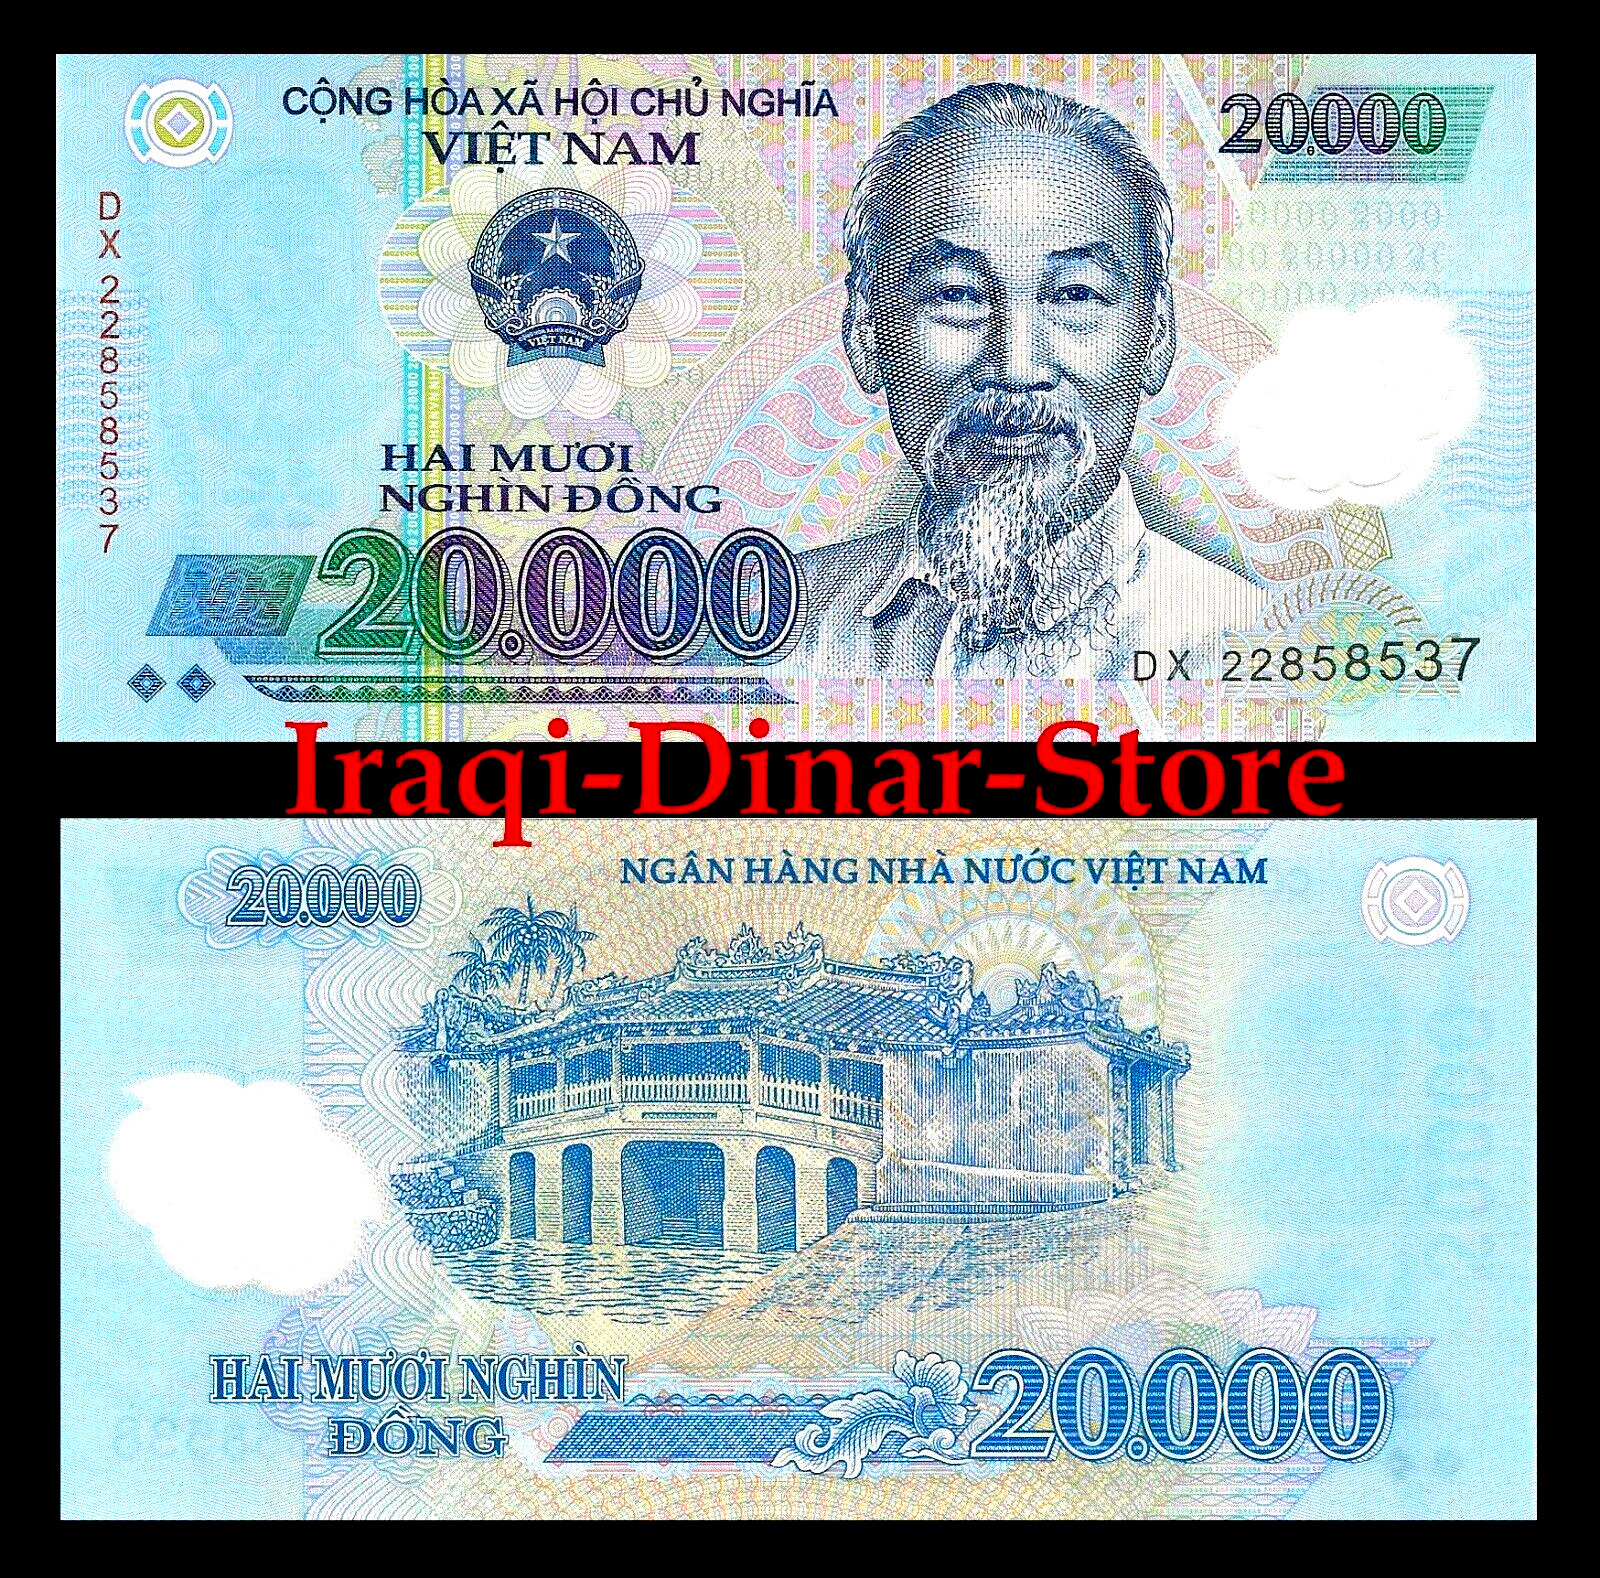 Vietnam Dong 5 x 20,000 Dong = 100,000 Viet Nam Dong New Unc Collectable